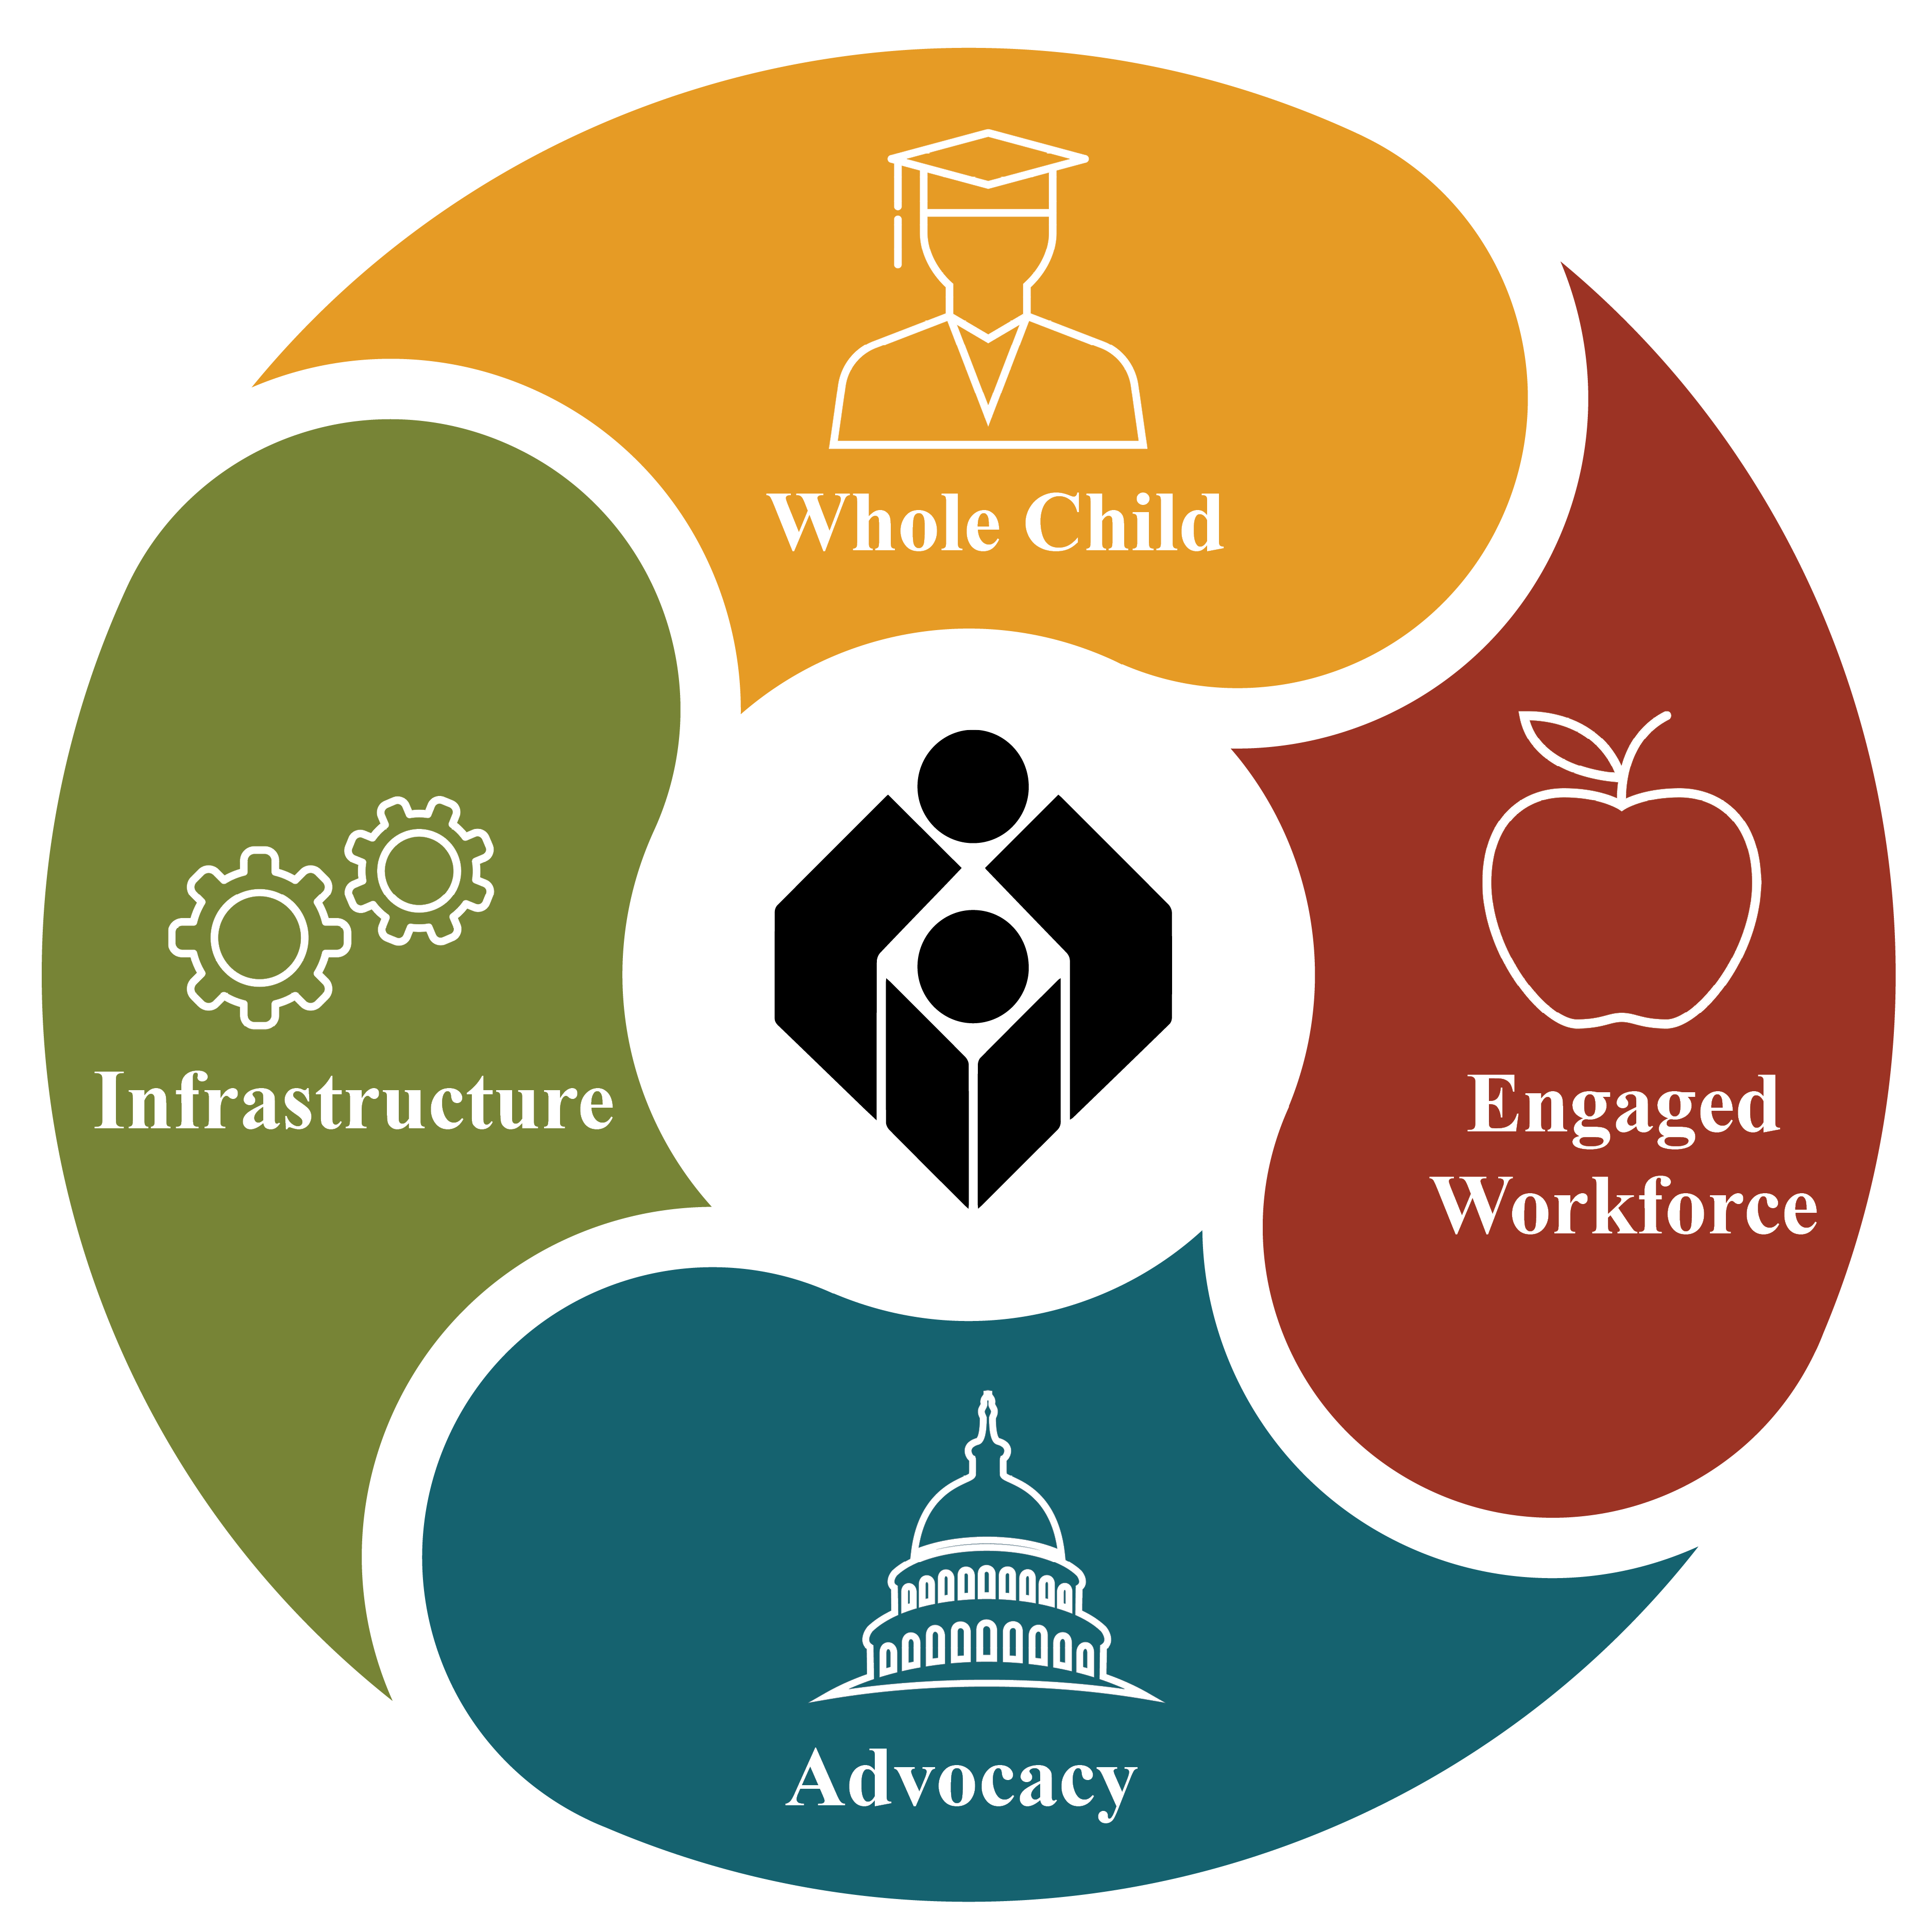 This circle represents our four goal areas, infrastructure, advocacy, engaged workforce and whole child